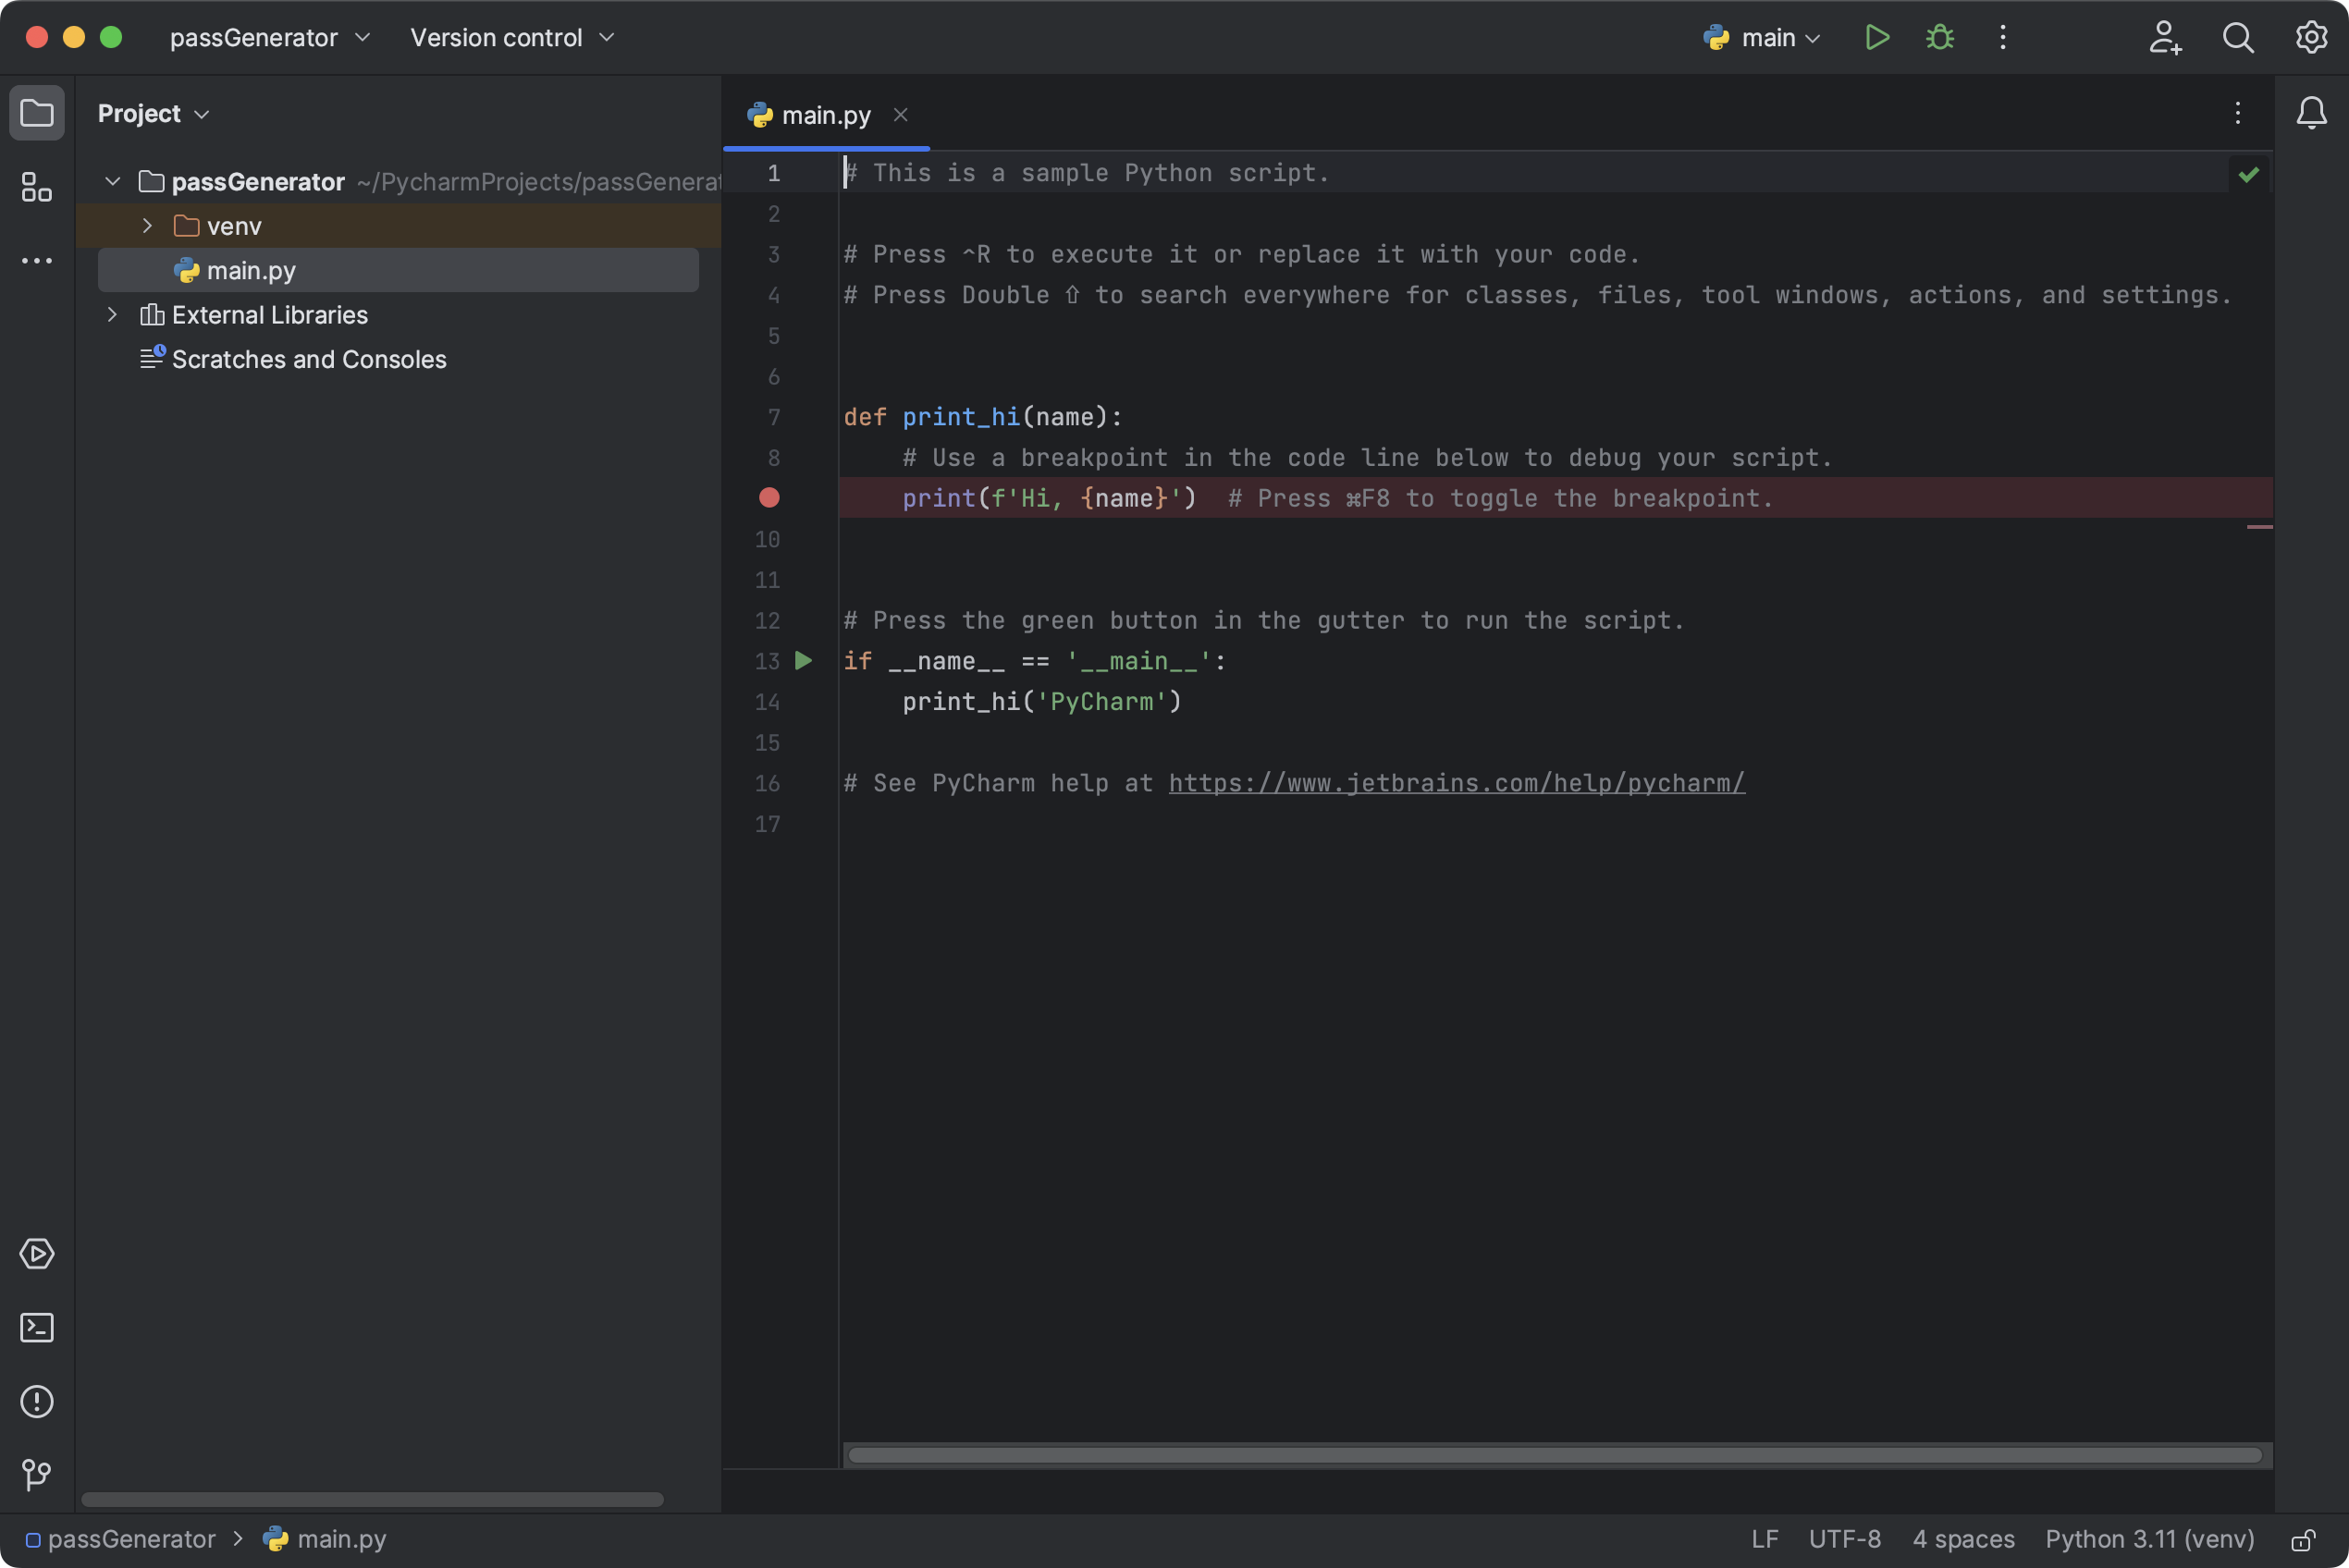 The newly created project in PyCharm